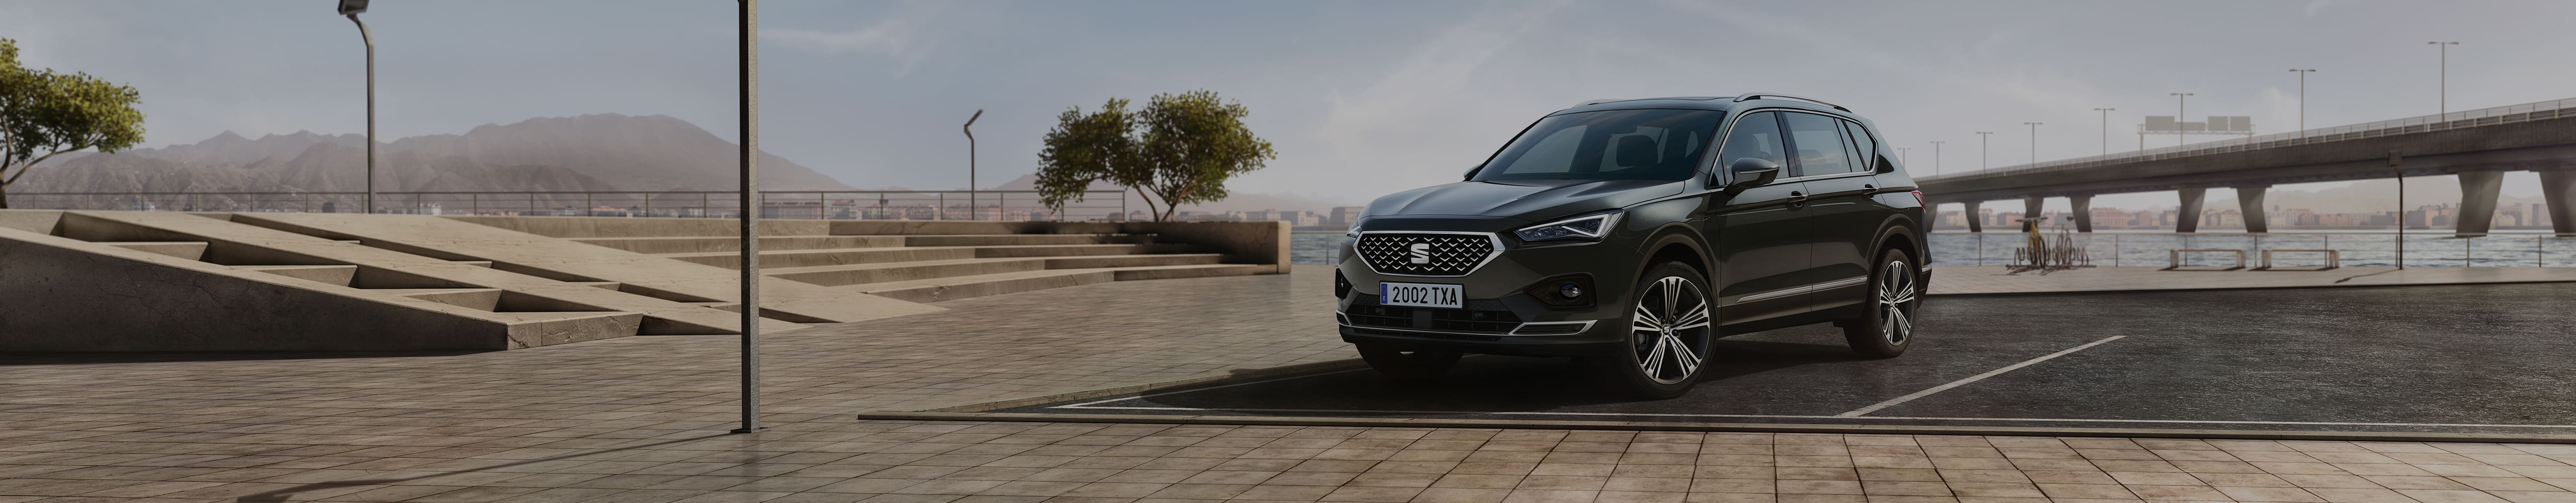 SEAT Tarraco 2021 SUV in dolphin grey colour parked